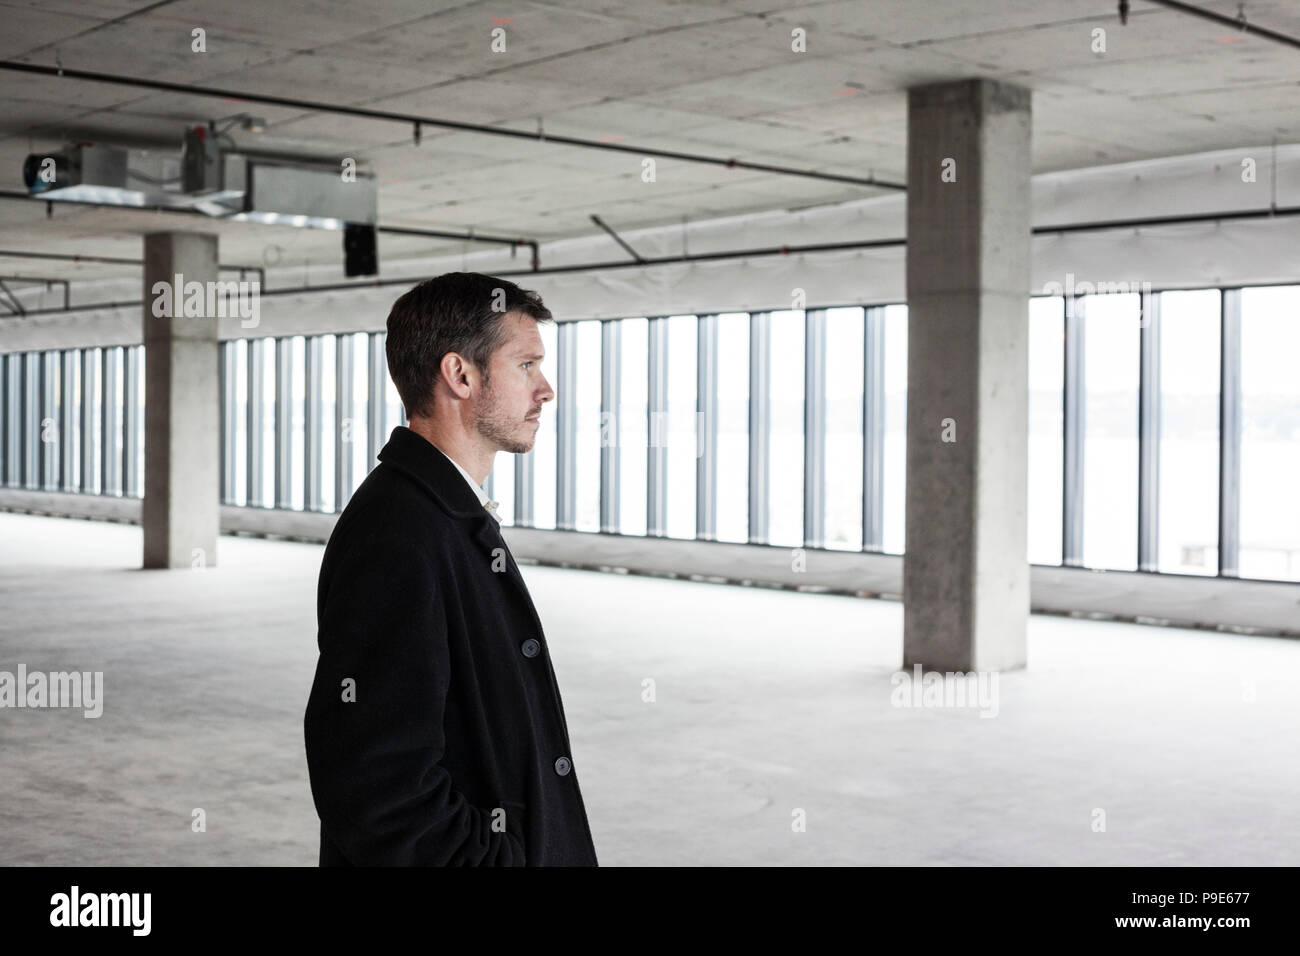 A man lookin around an empty building, raw office space, potential business premises, architect or planner. Stock Photo